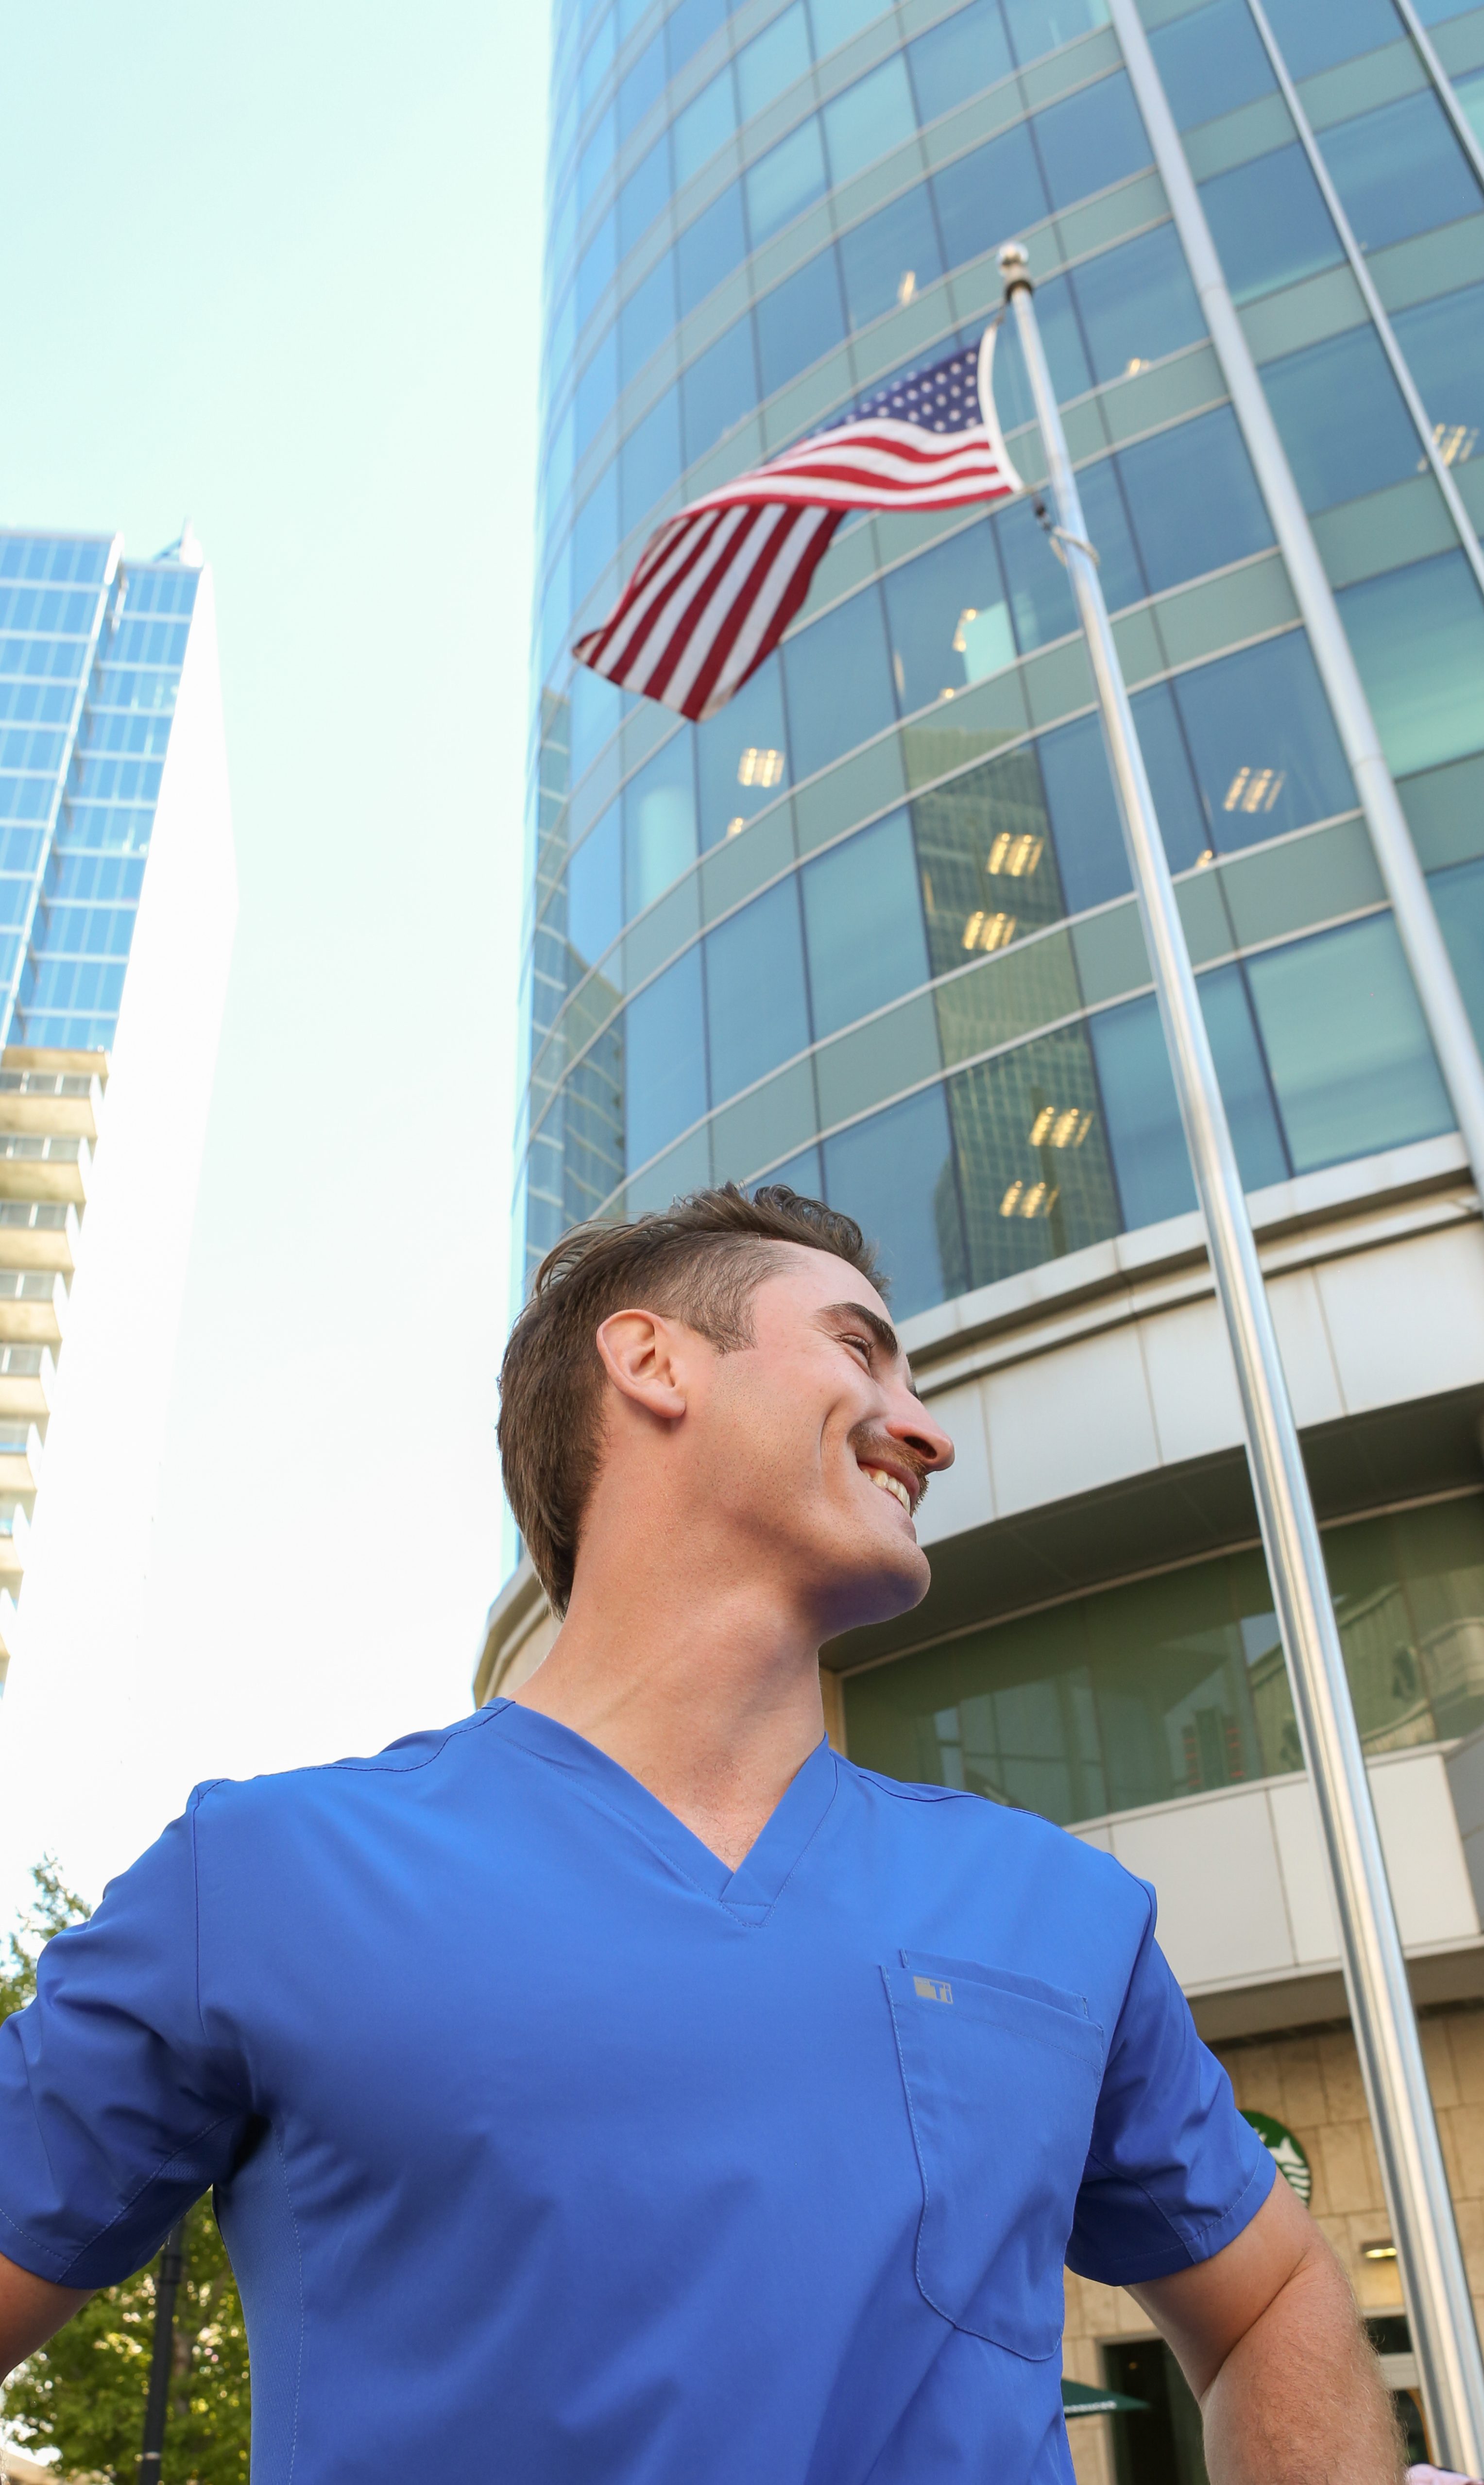 Man in Royal Blue TiScrubs Double-Pocket Top in City by American Flag